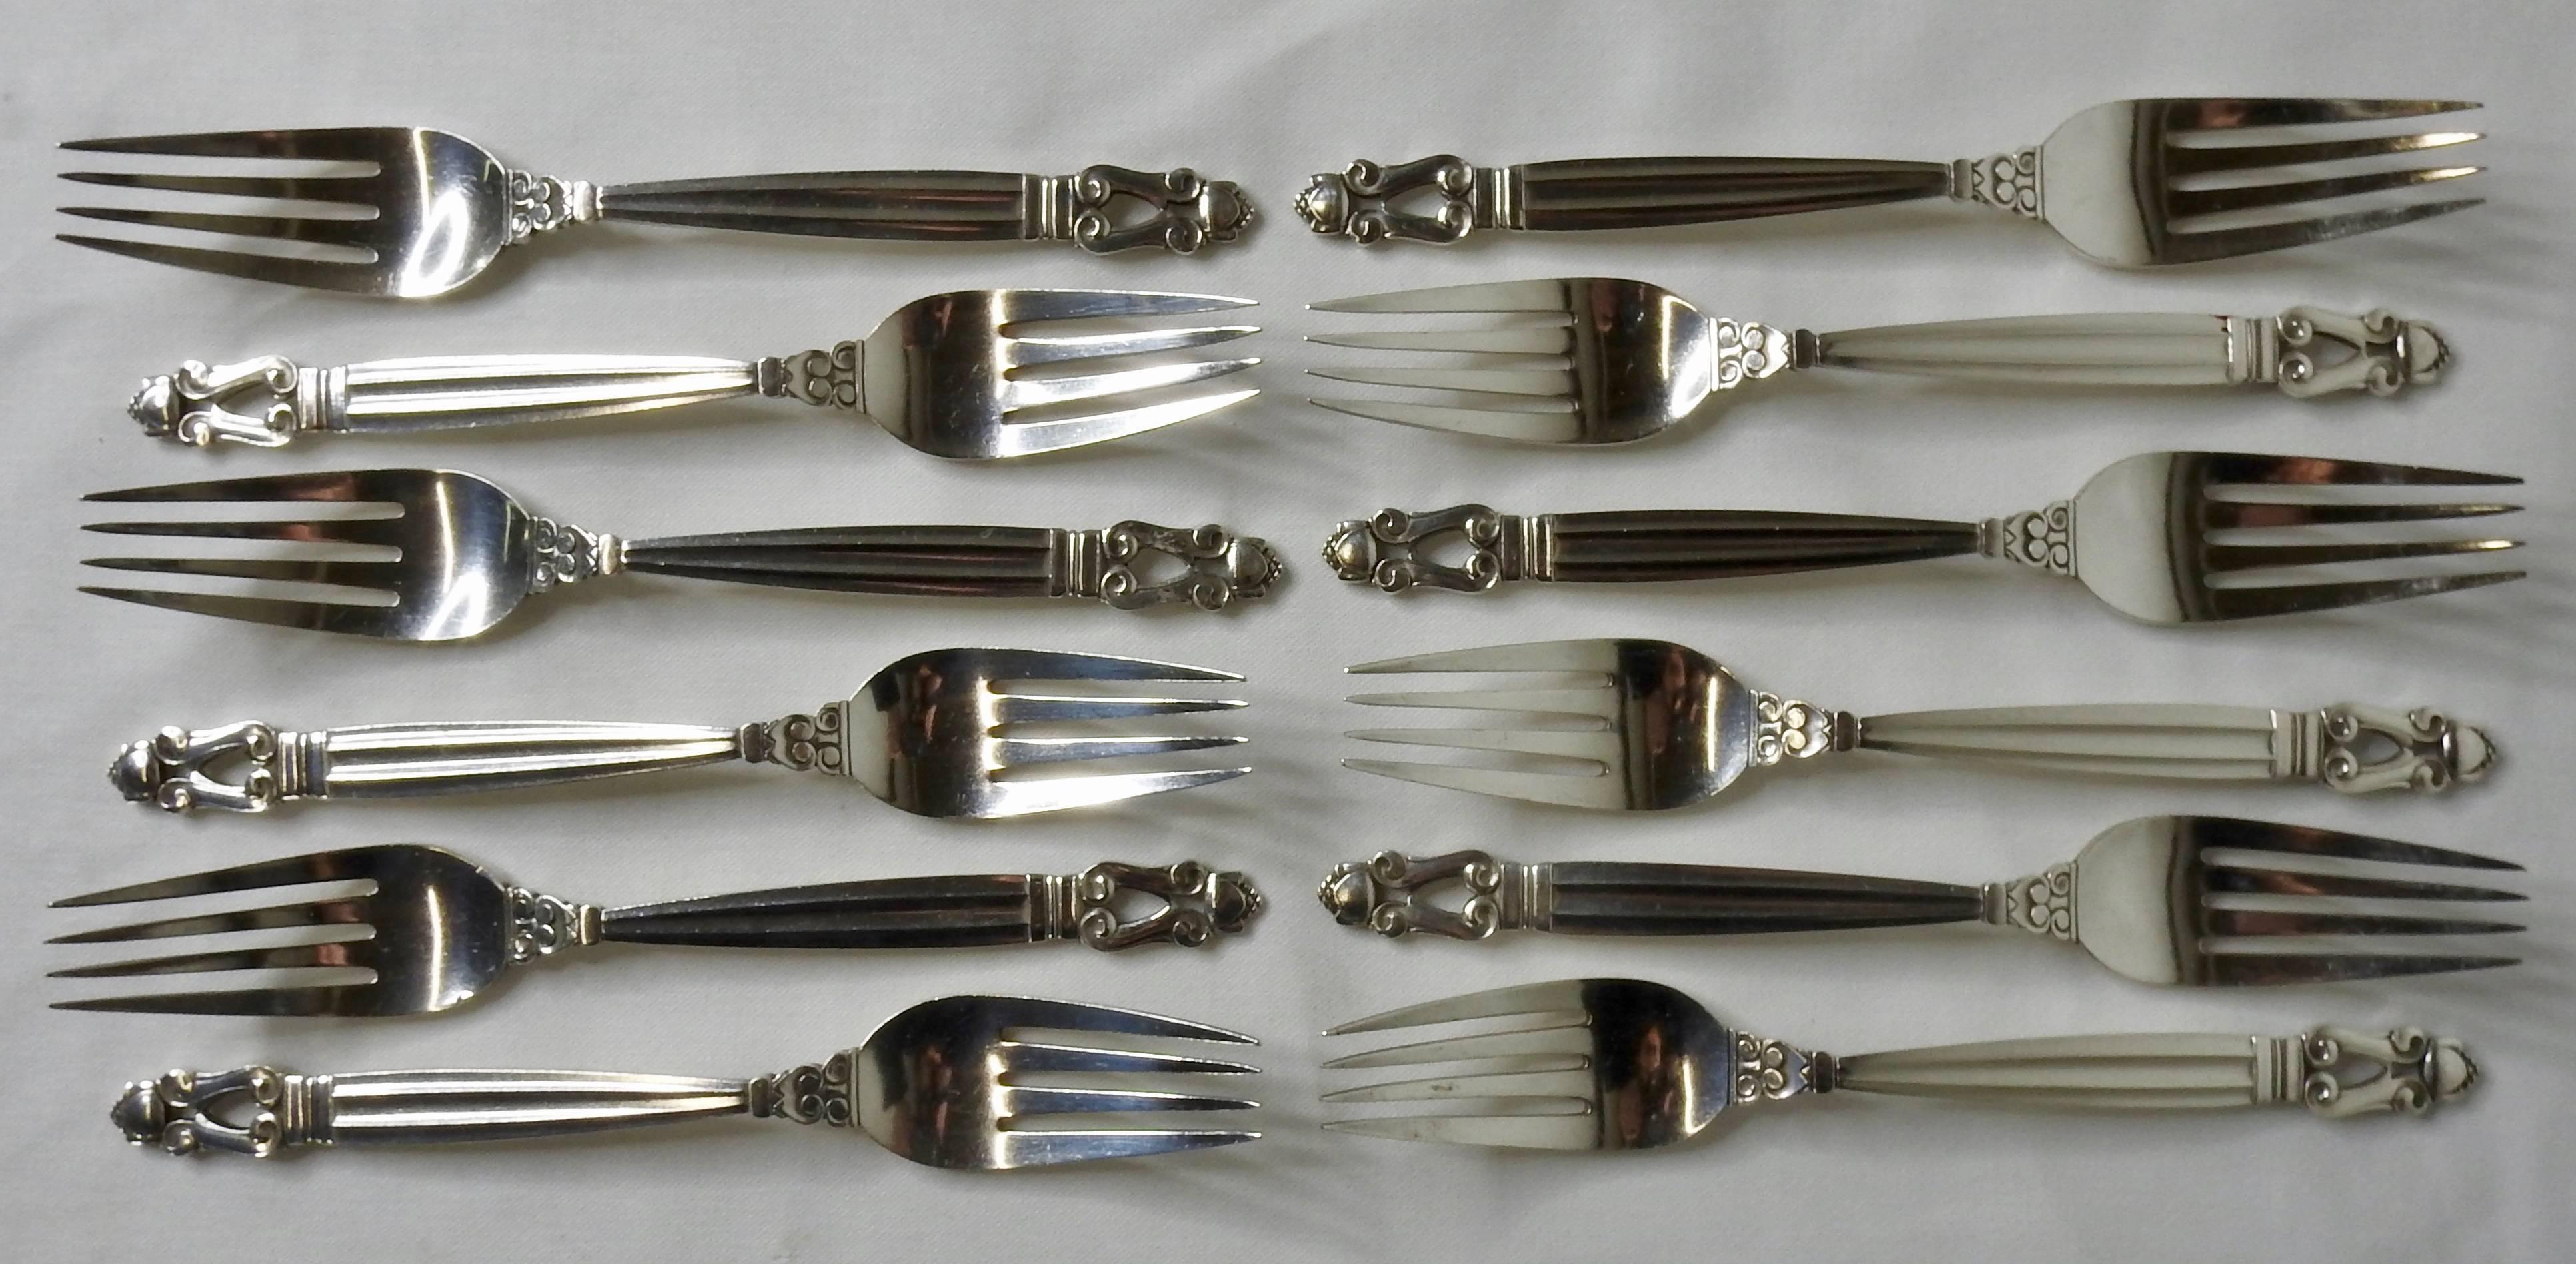 We are offering a Georg Jensen Acorn sterling silver flatware consisting of service for 12 with a total of 72 pieces. The set includes dinner forks, salad forks, knives, teaspoons, iced tea spoons and tablespoons all in a wooden case lined in brown